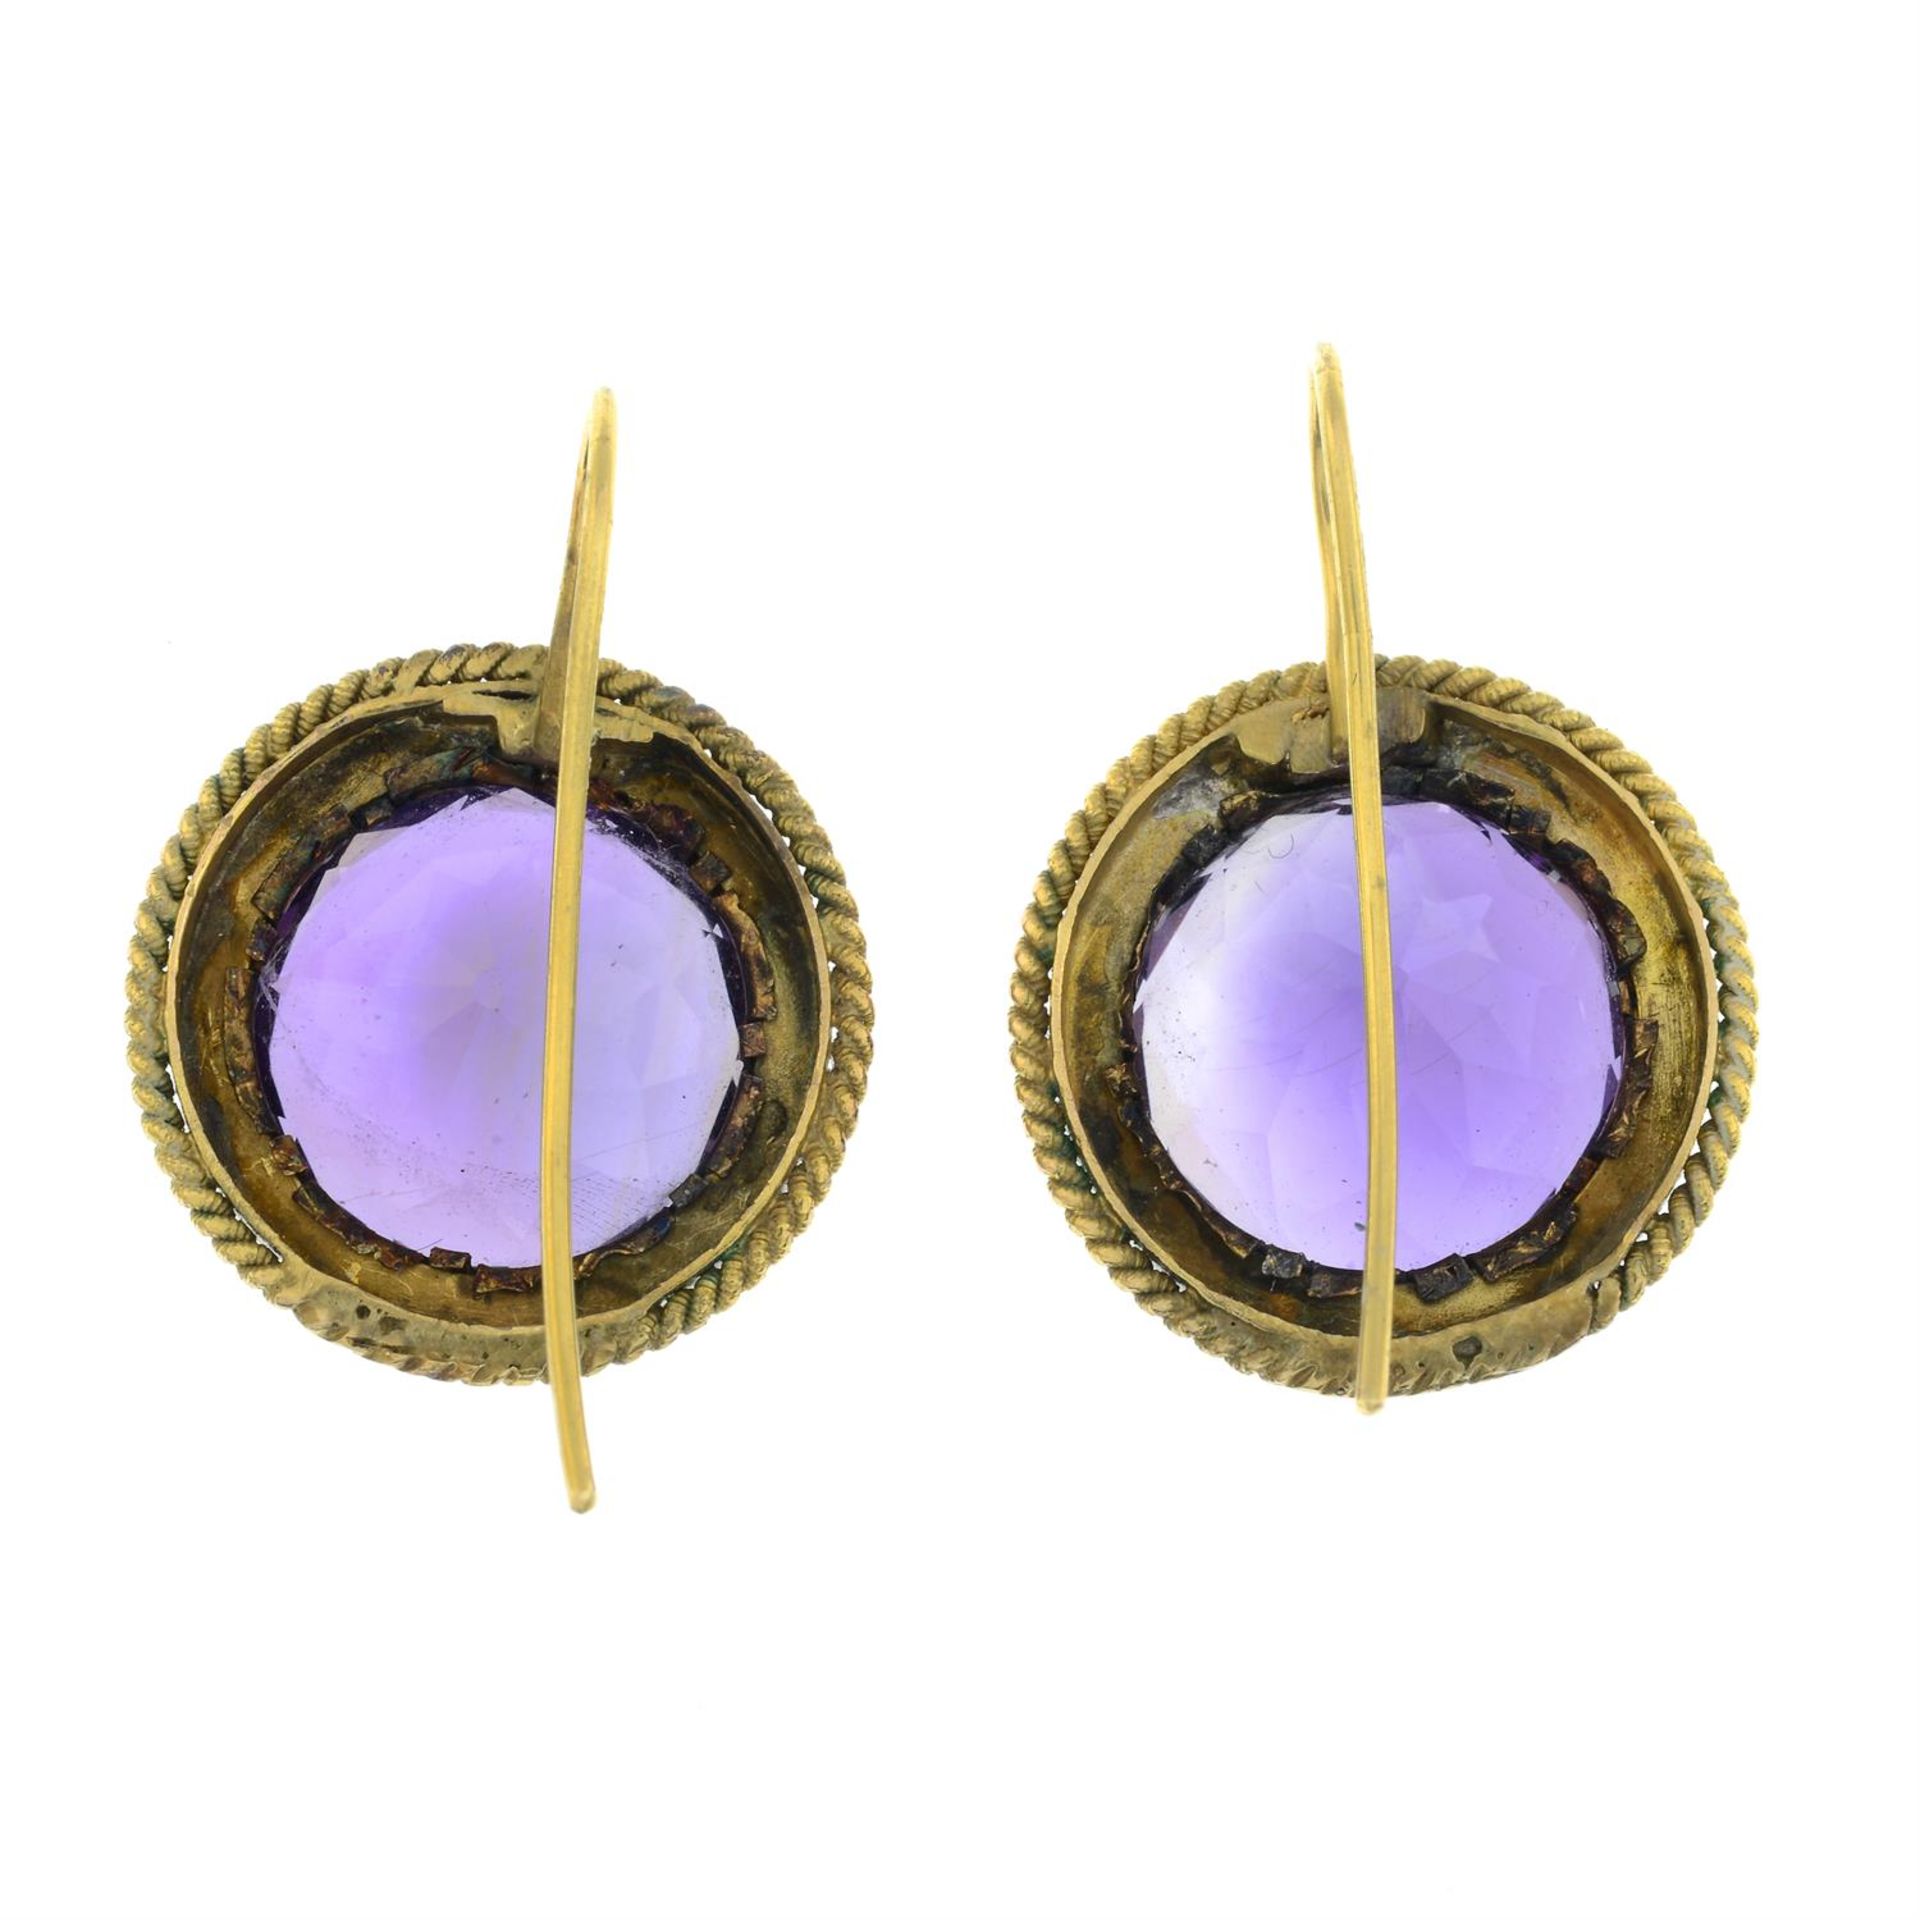 A pair of late 19th century gold amethyst earrings. - Image 3 of 4